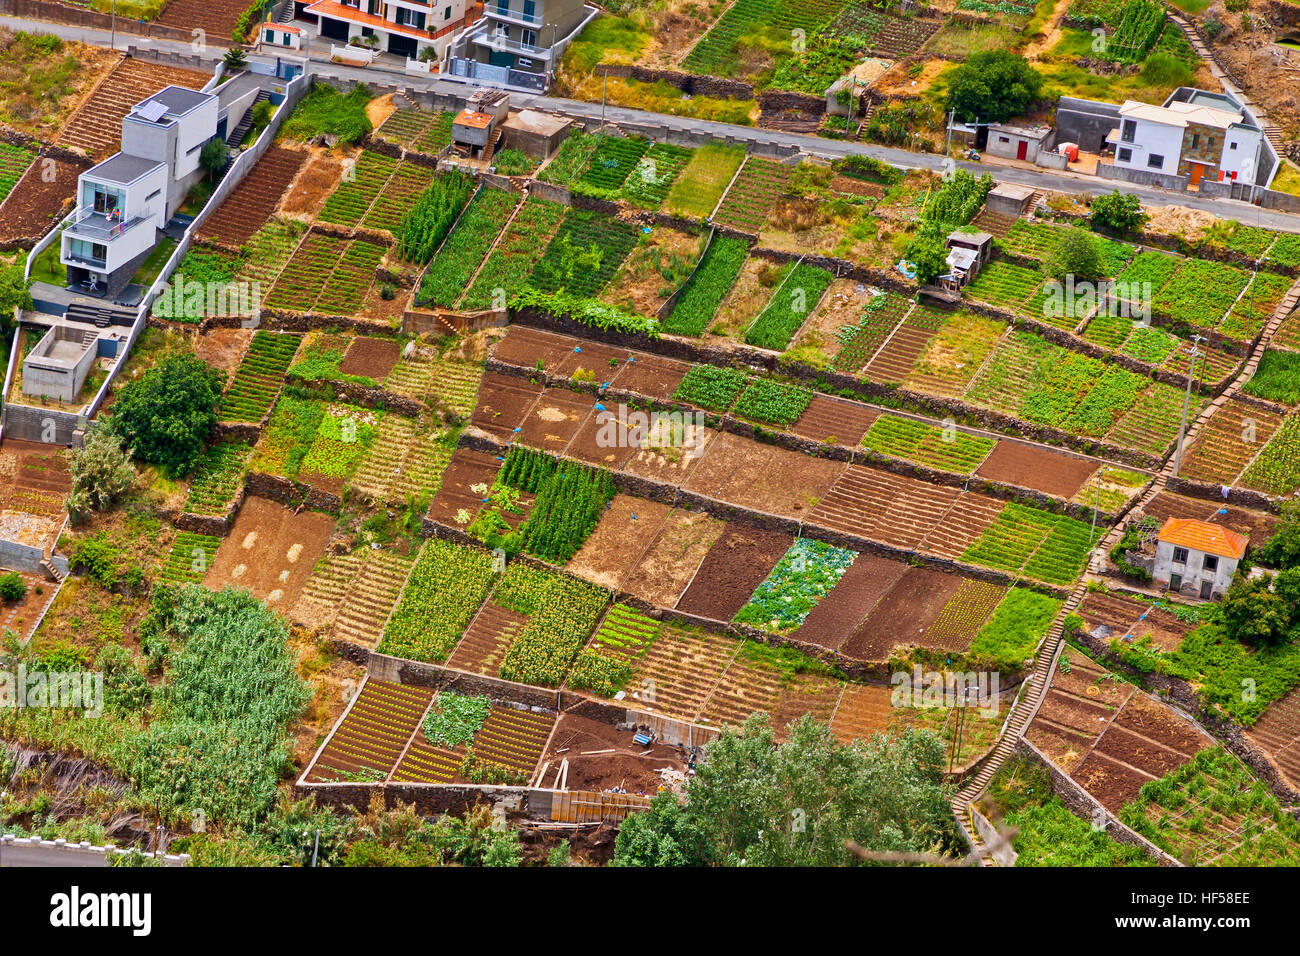 Picturesque rural landscape of Madeira island, Portugal Stock Photo